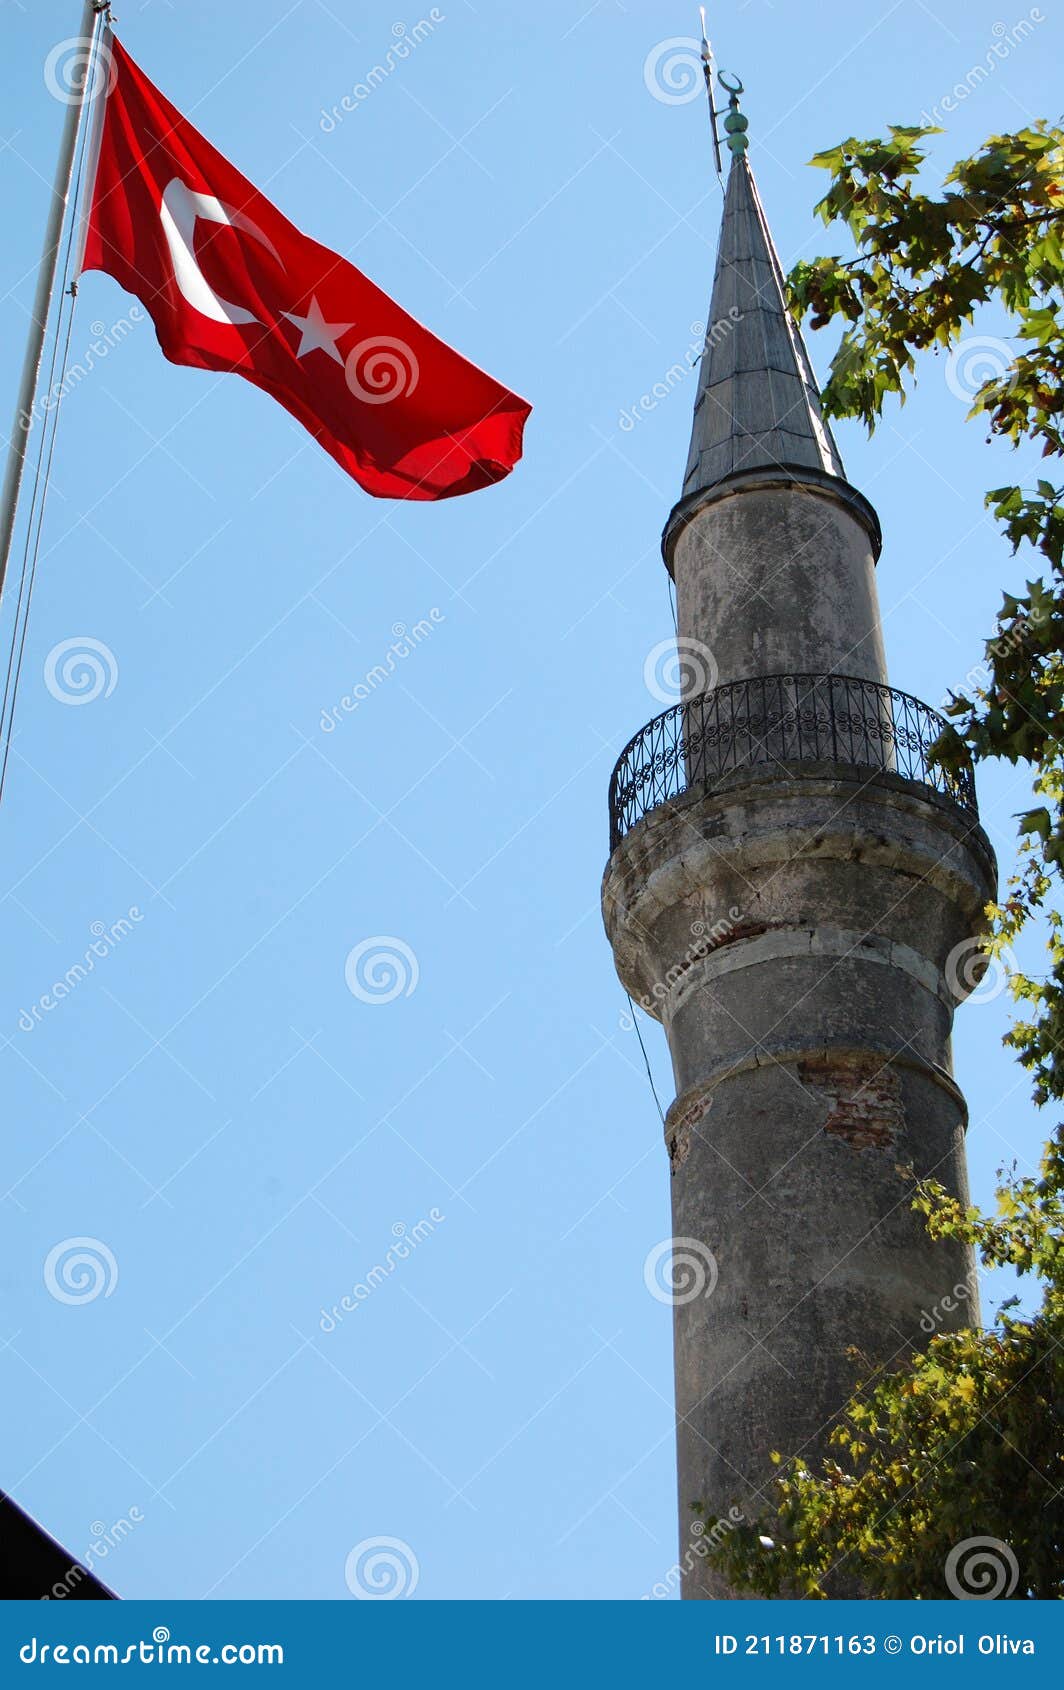 view of the main places and monuments of istanbul (turkey). minaret